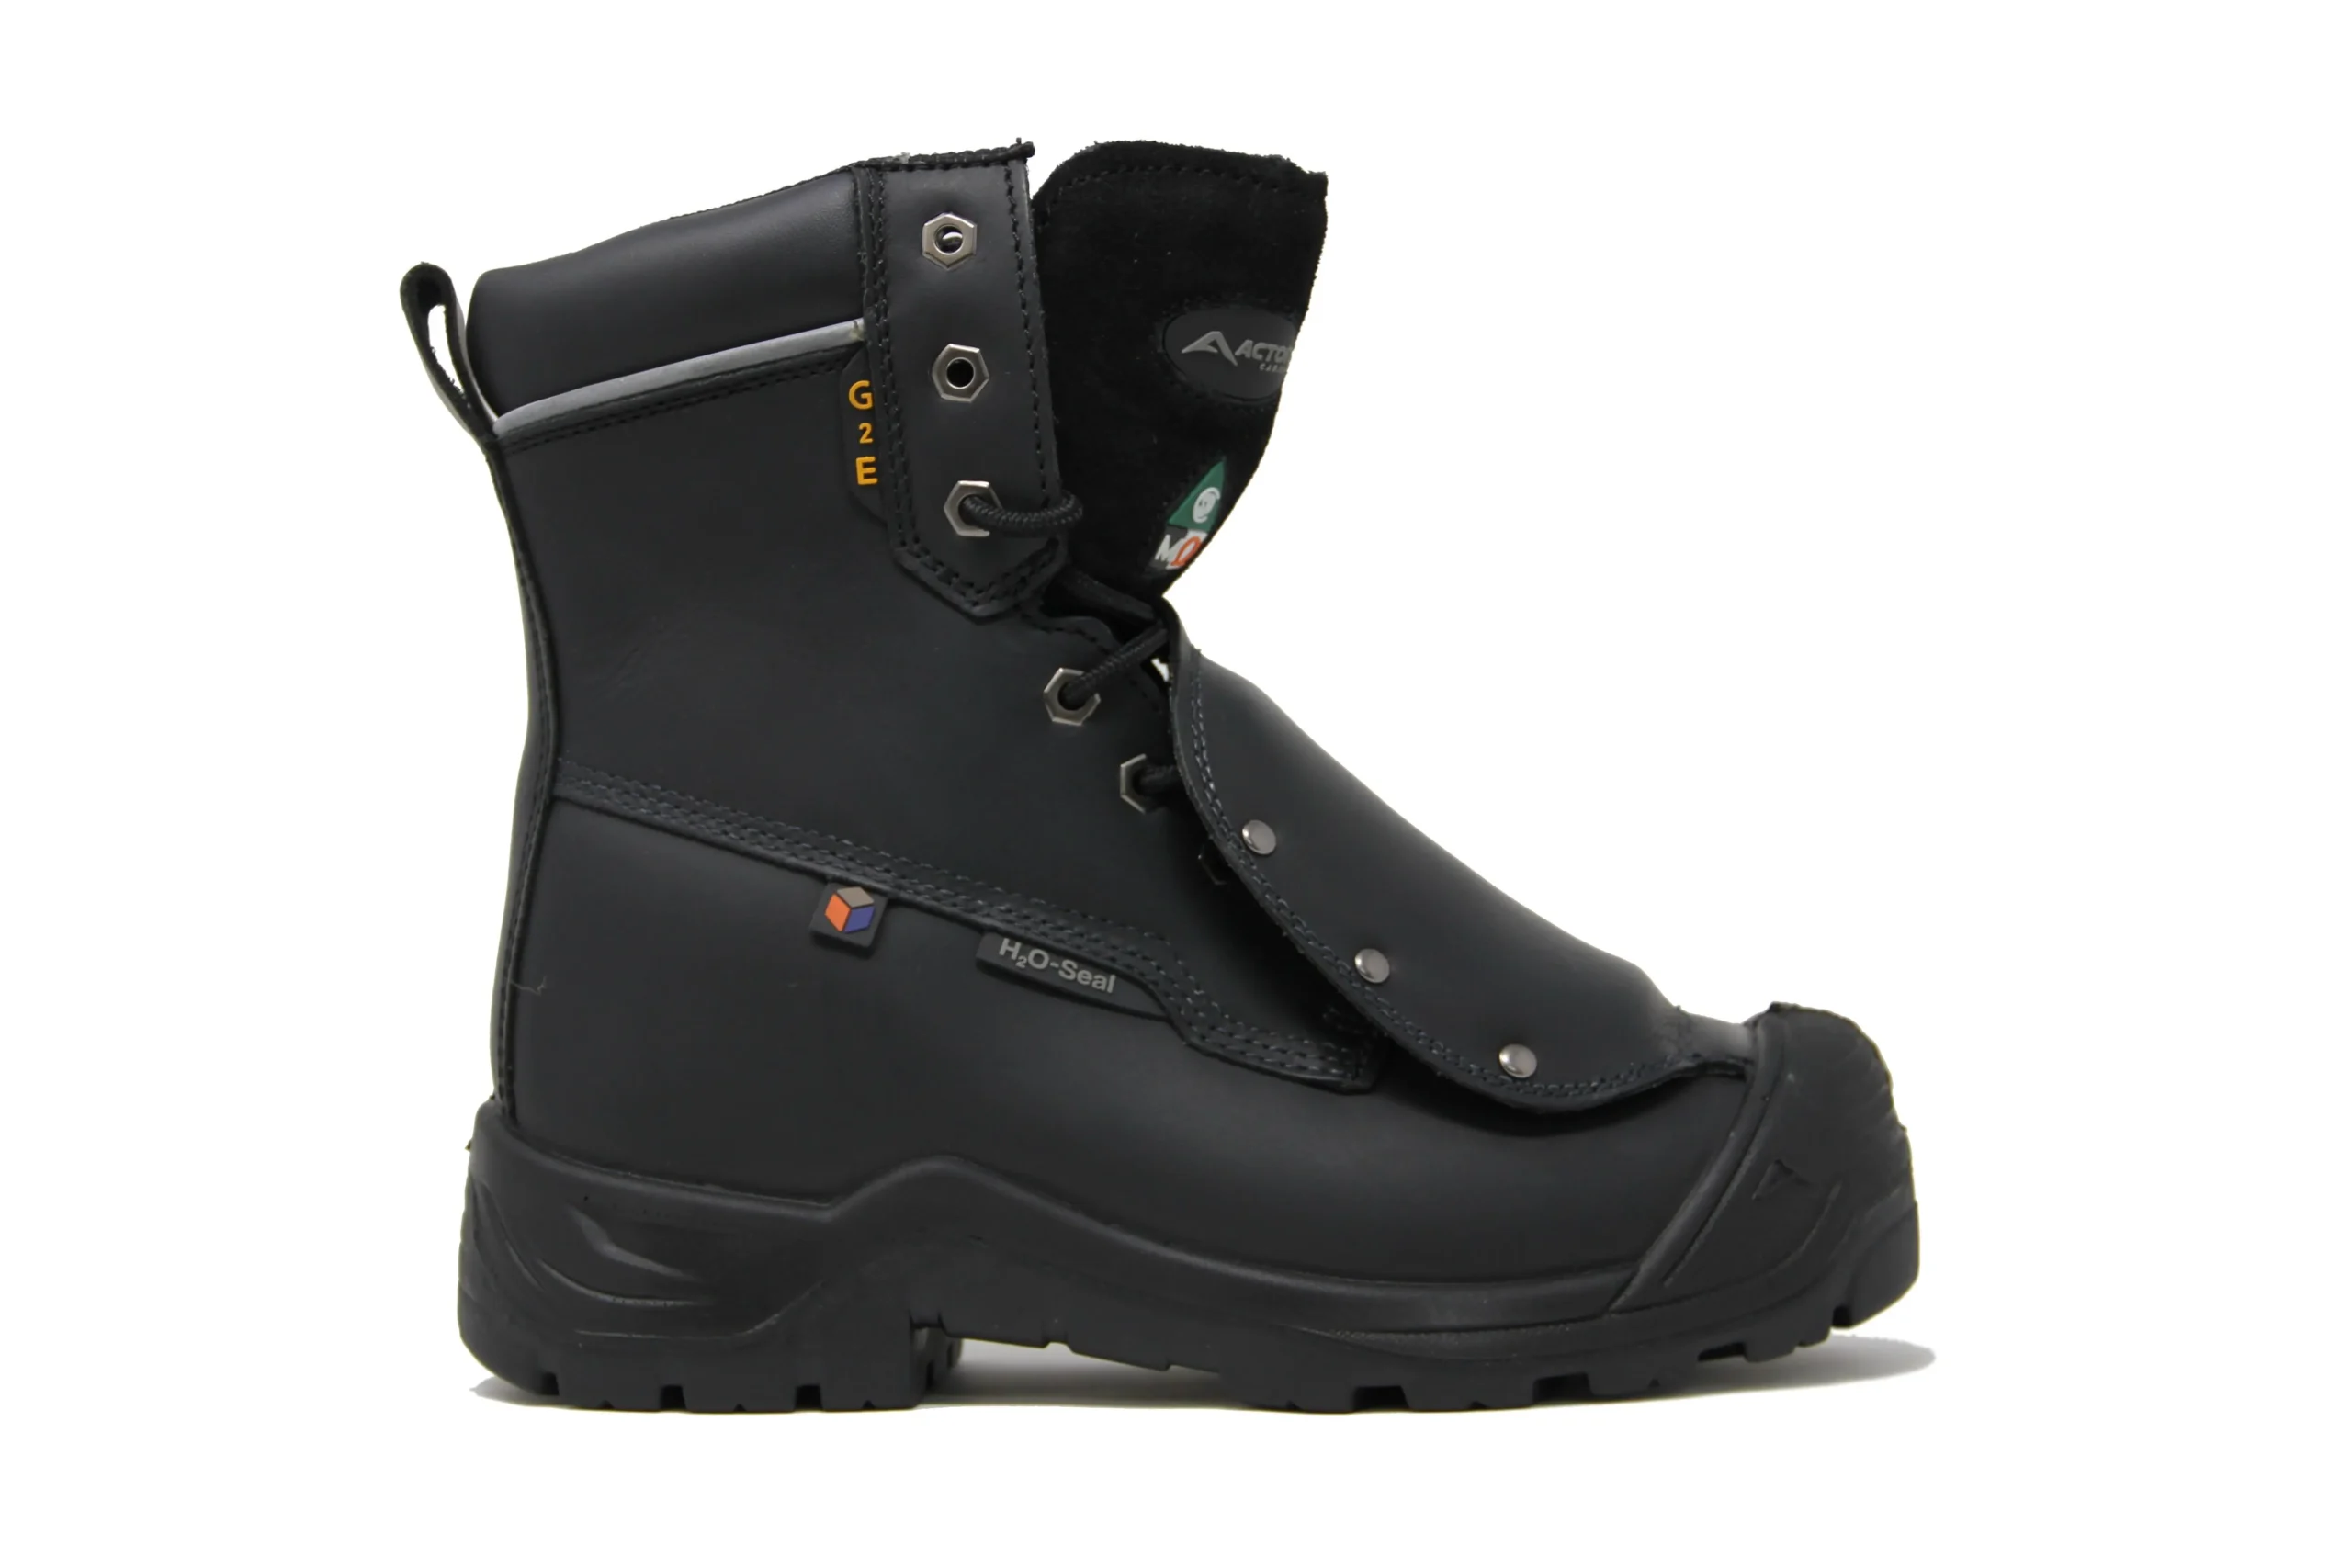 Acton – Boots – #9077-11 – Right